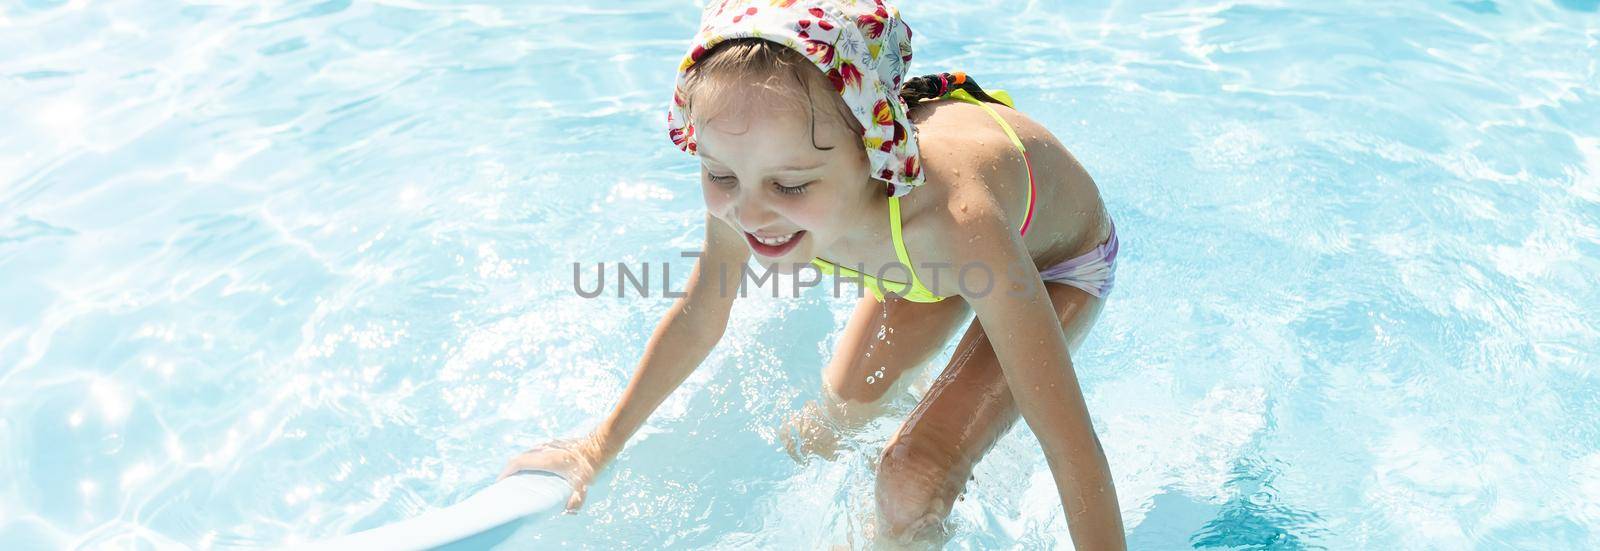 Swimming - little girl playing in blue water - space for text